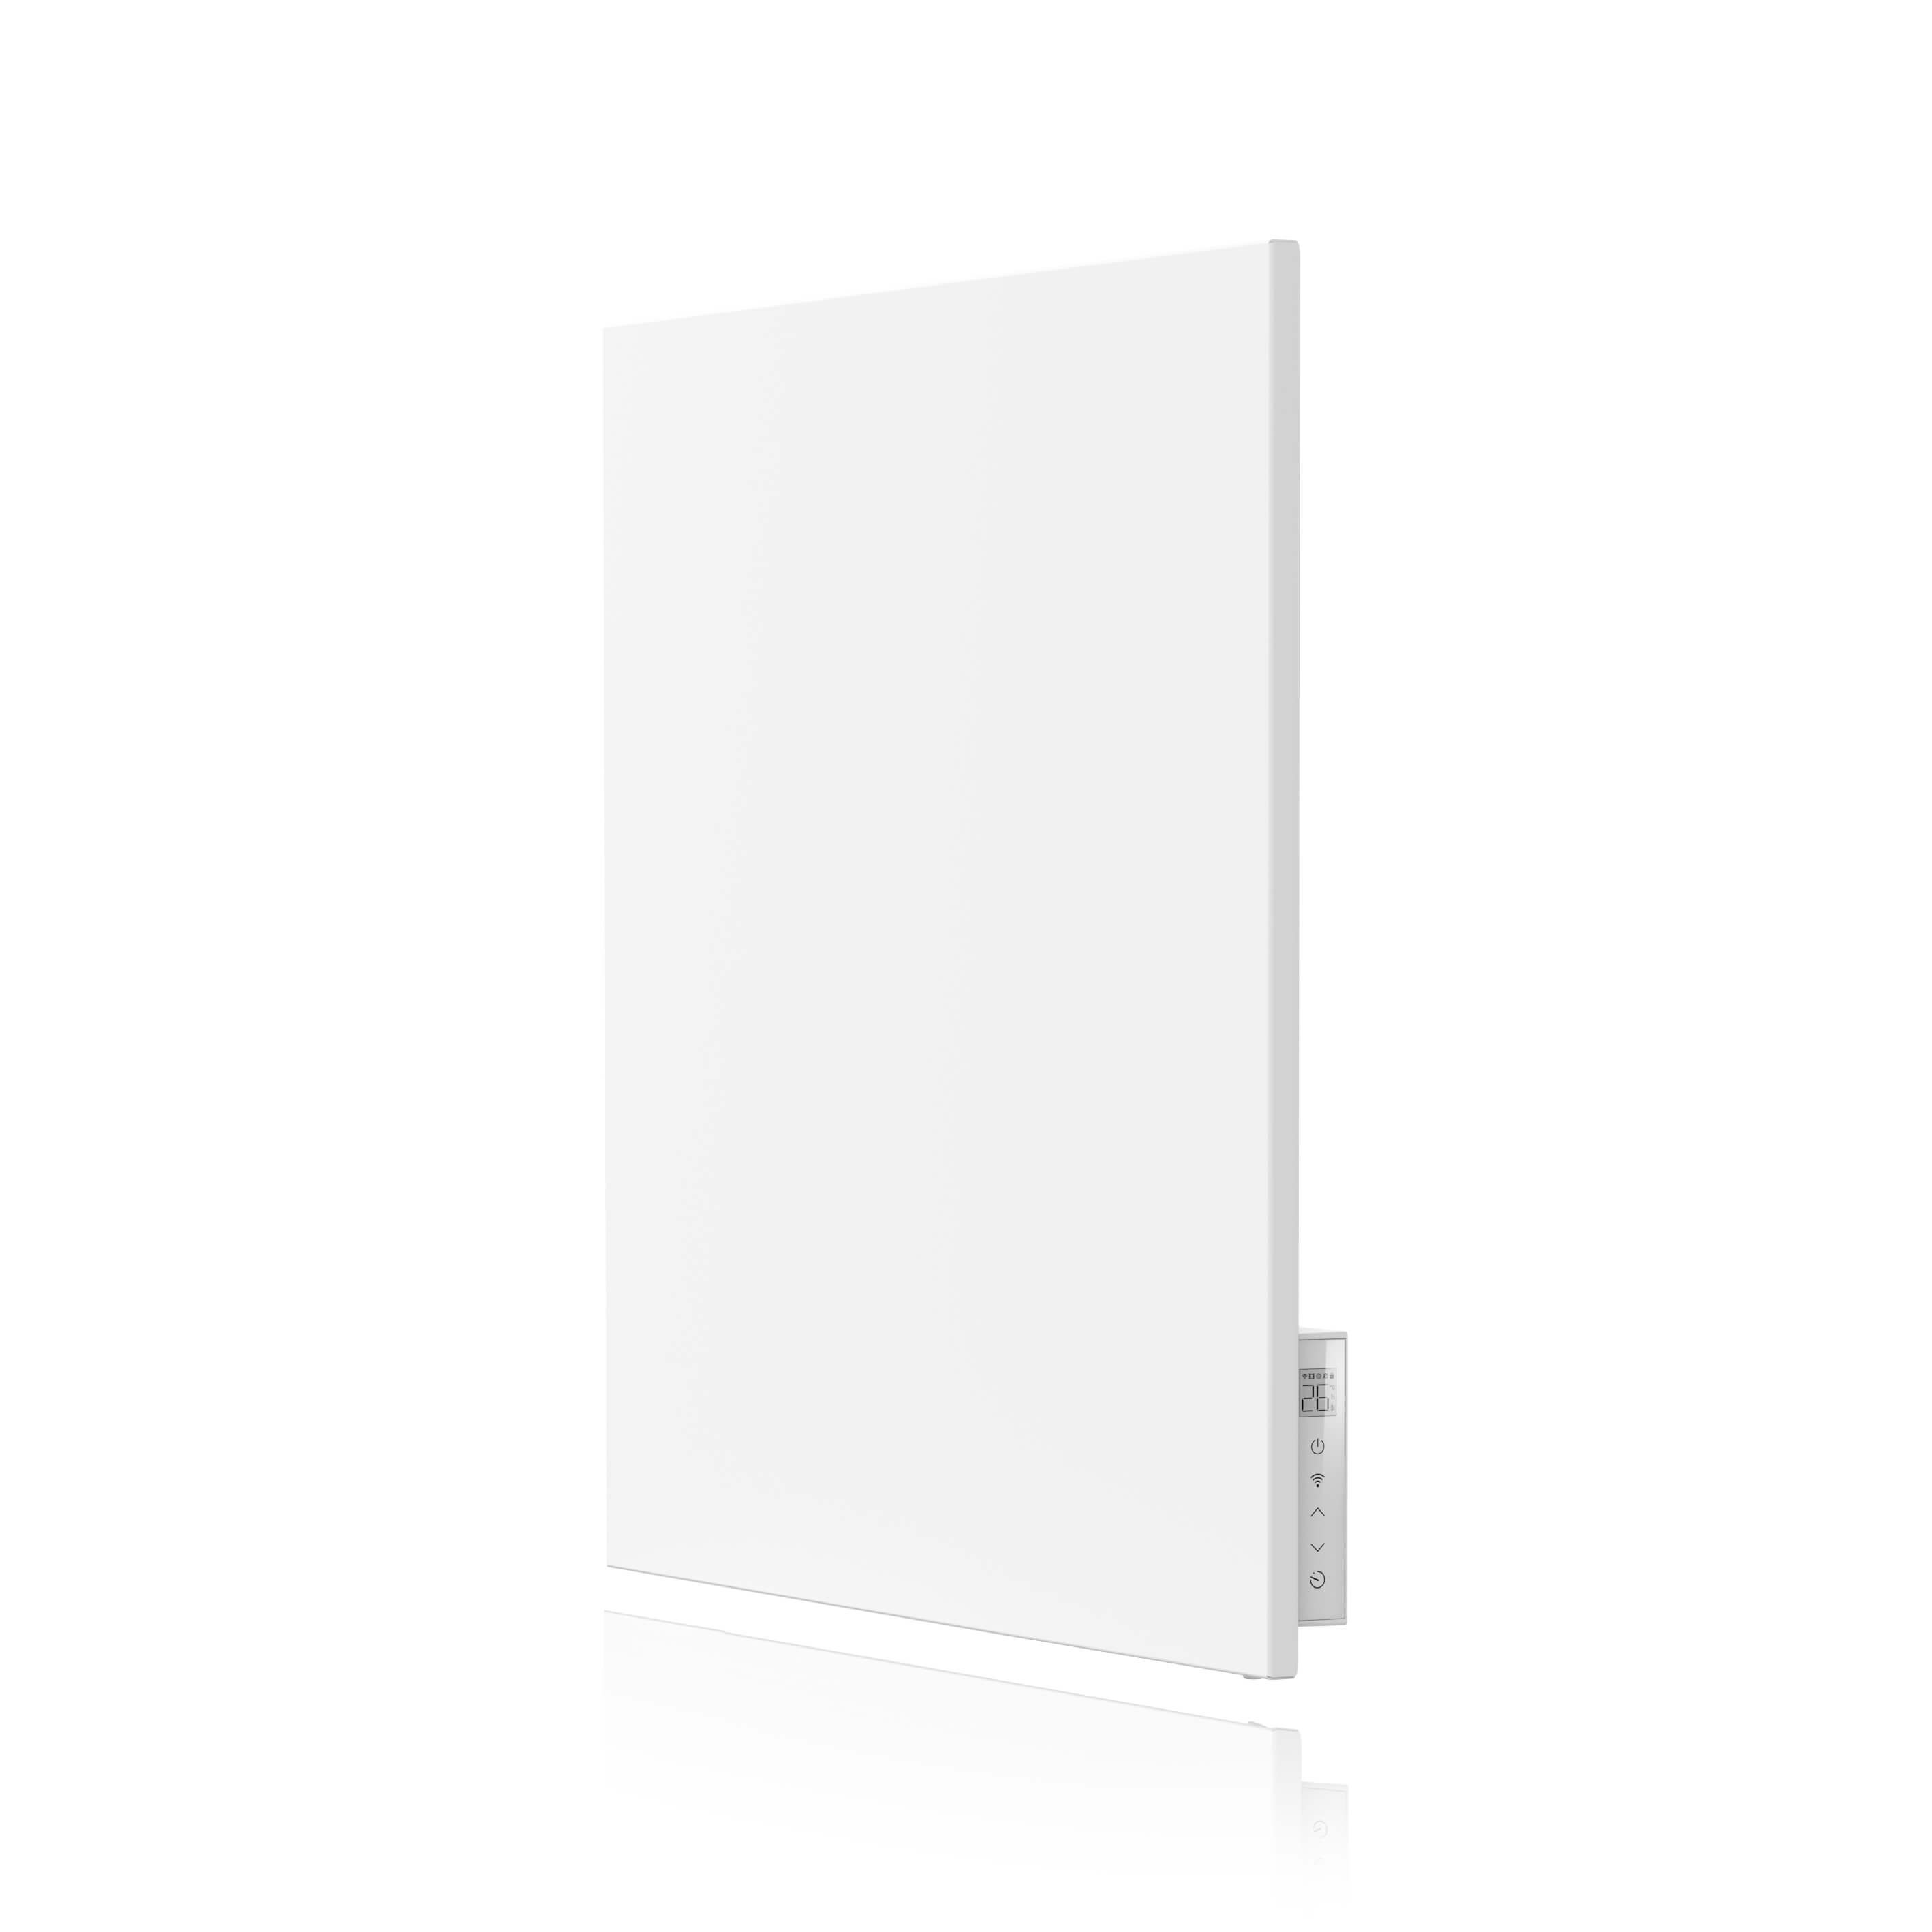 Infrared Ceiling Mounted Heating Panel Heater